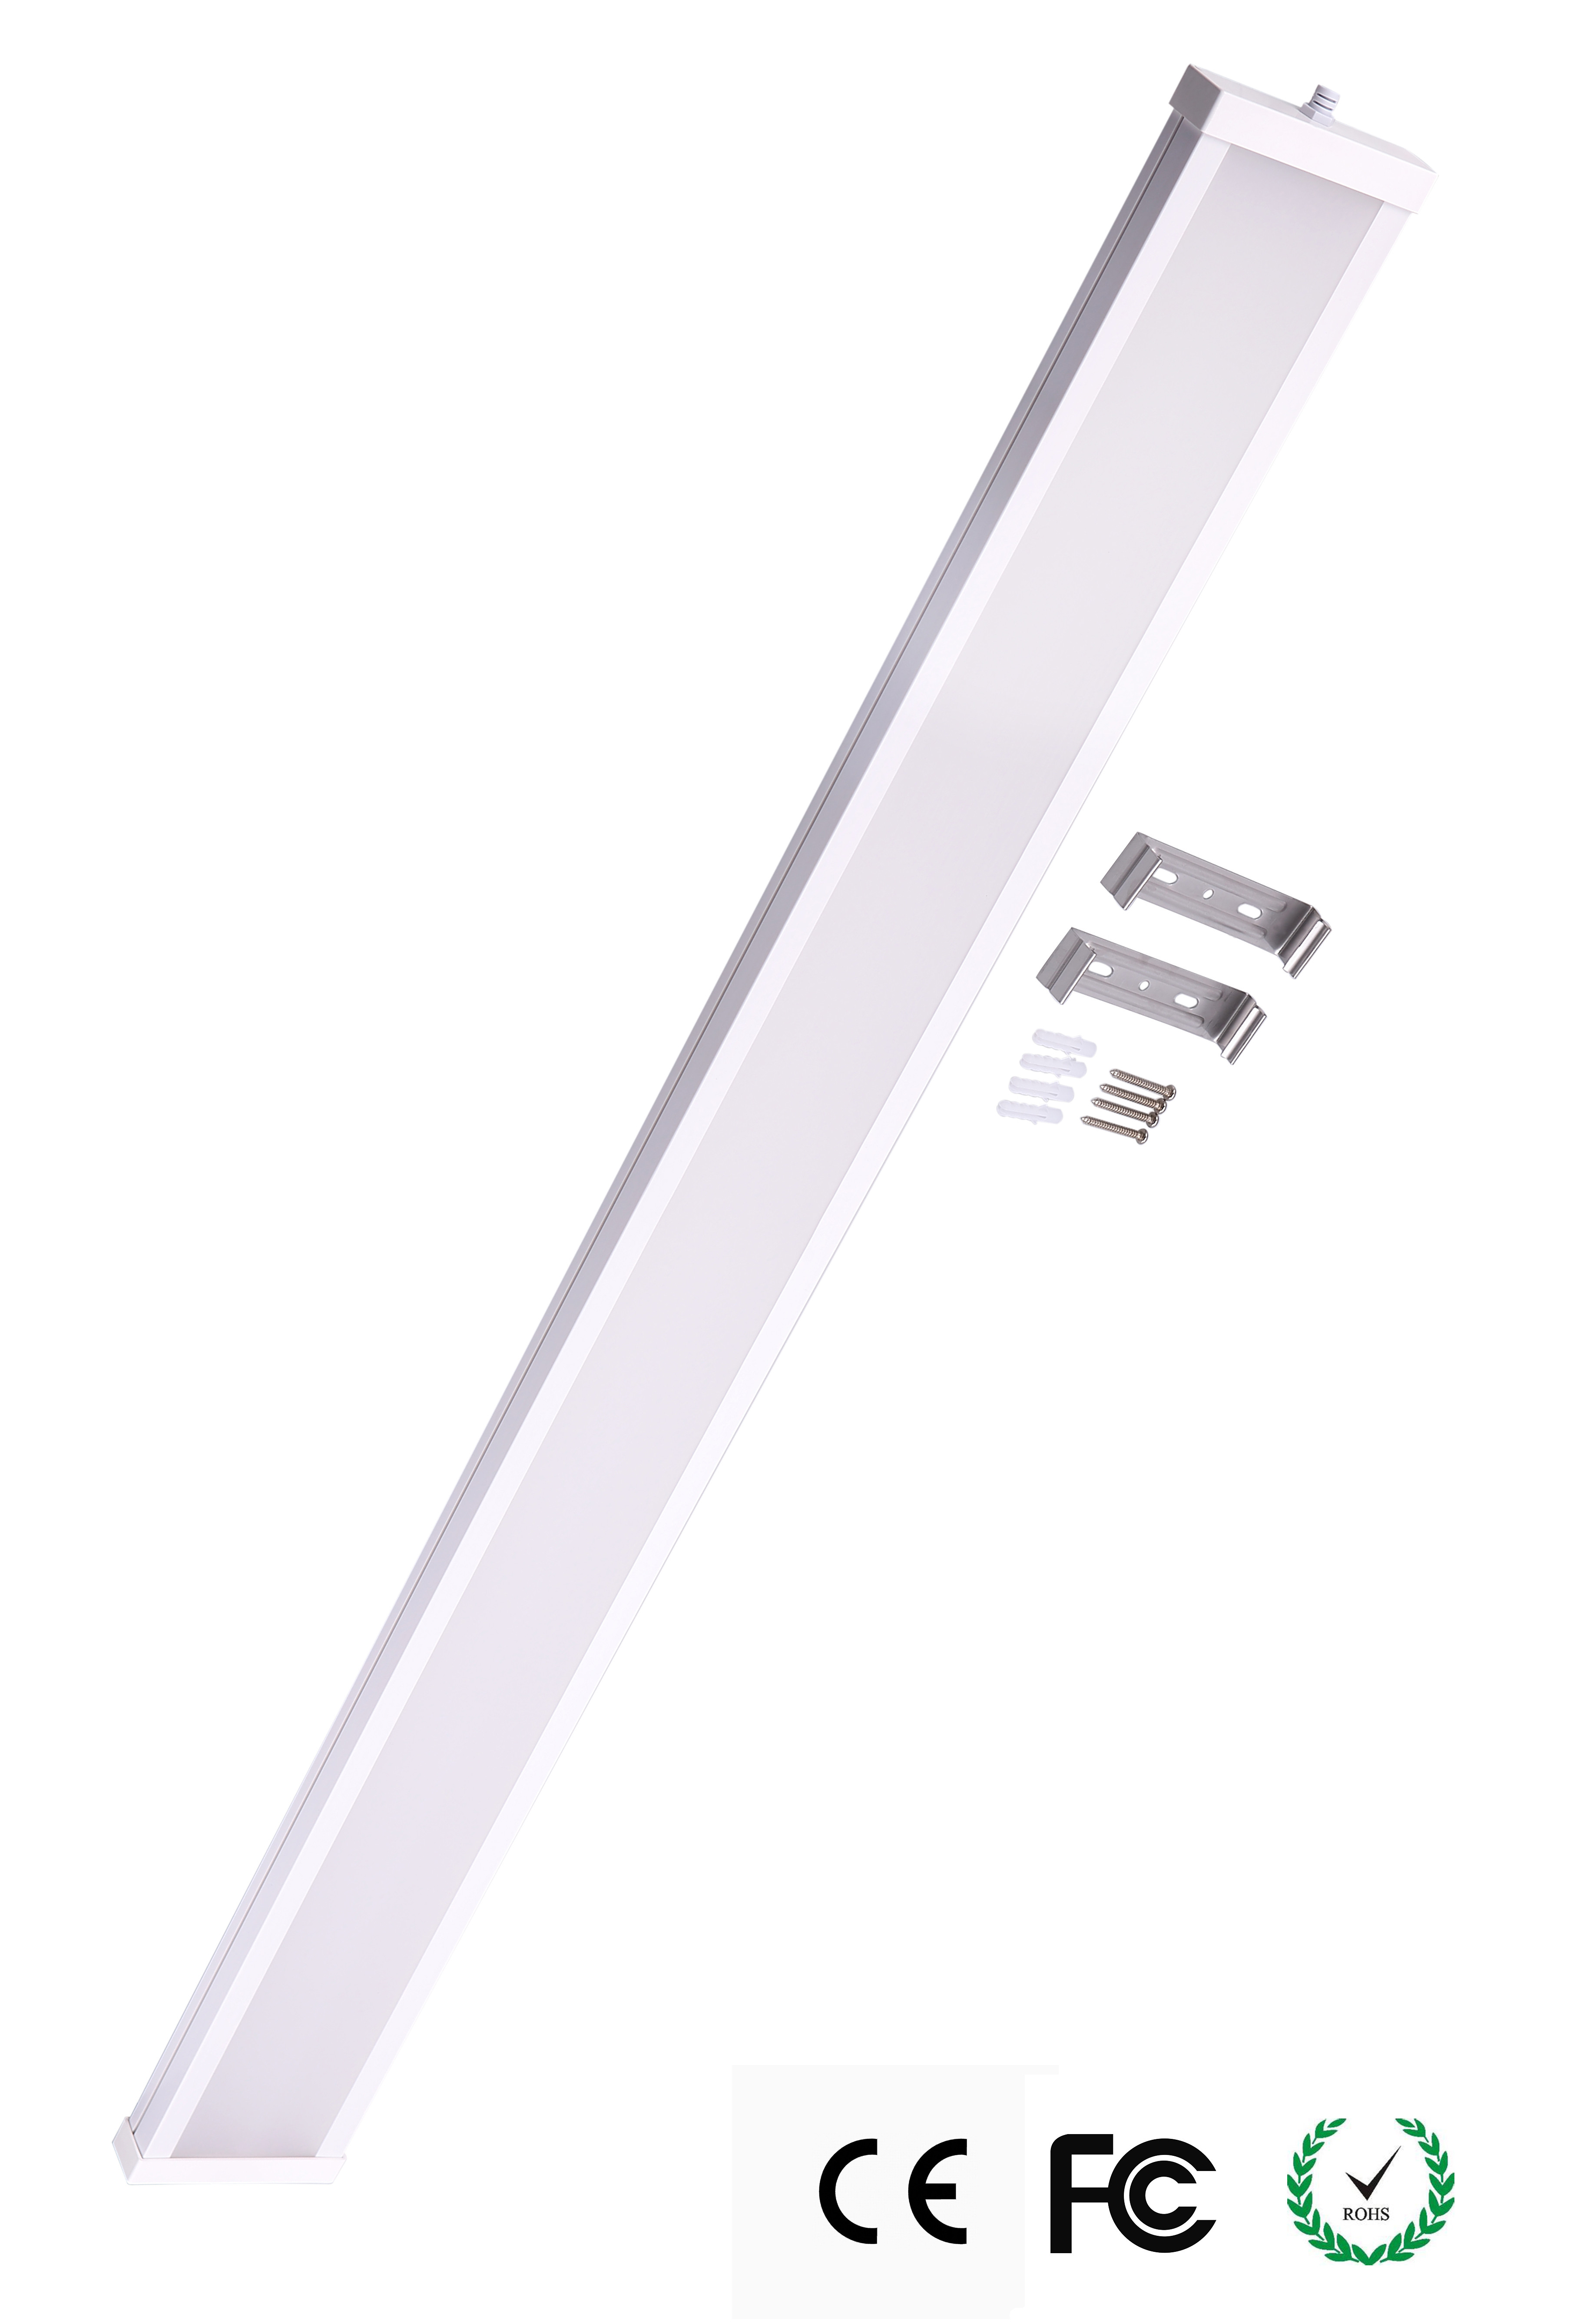 Wholesale SMD 2835 Epistar LED Tri-Proof Light , Ulttra Thin LED Tri-Proof Lamp from china suppliers